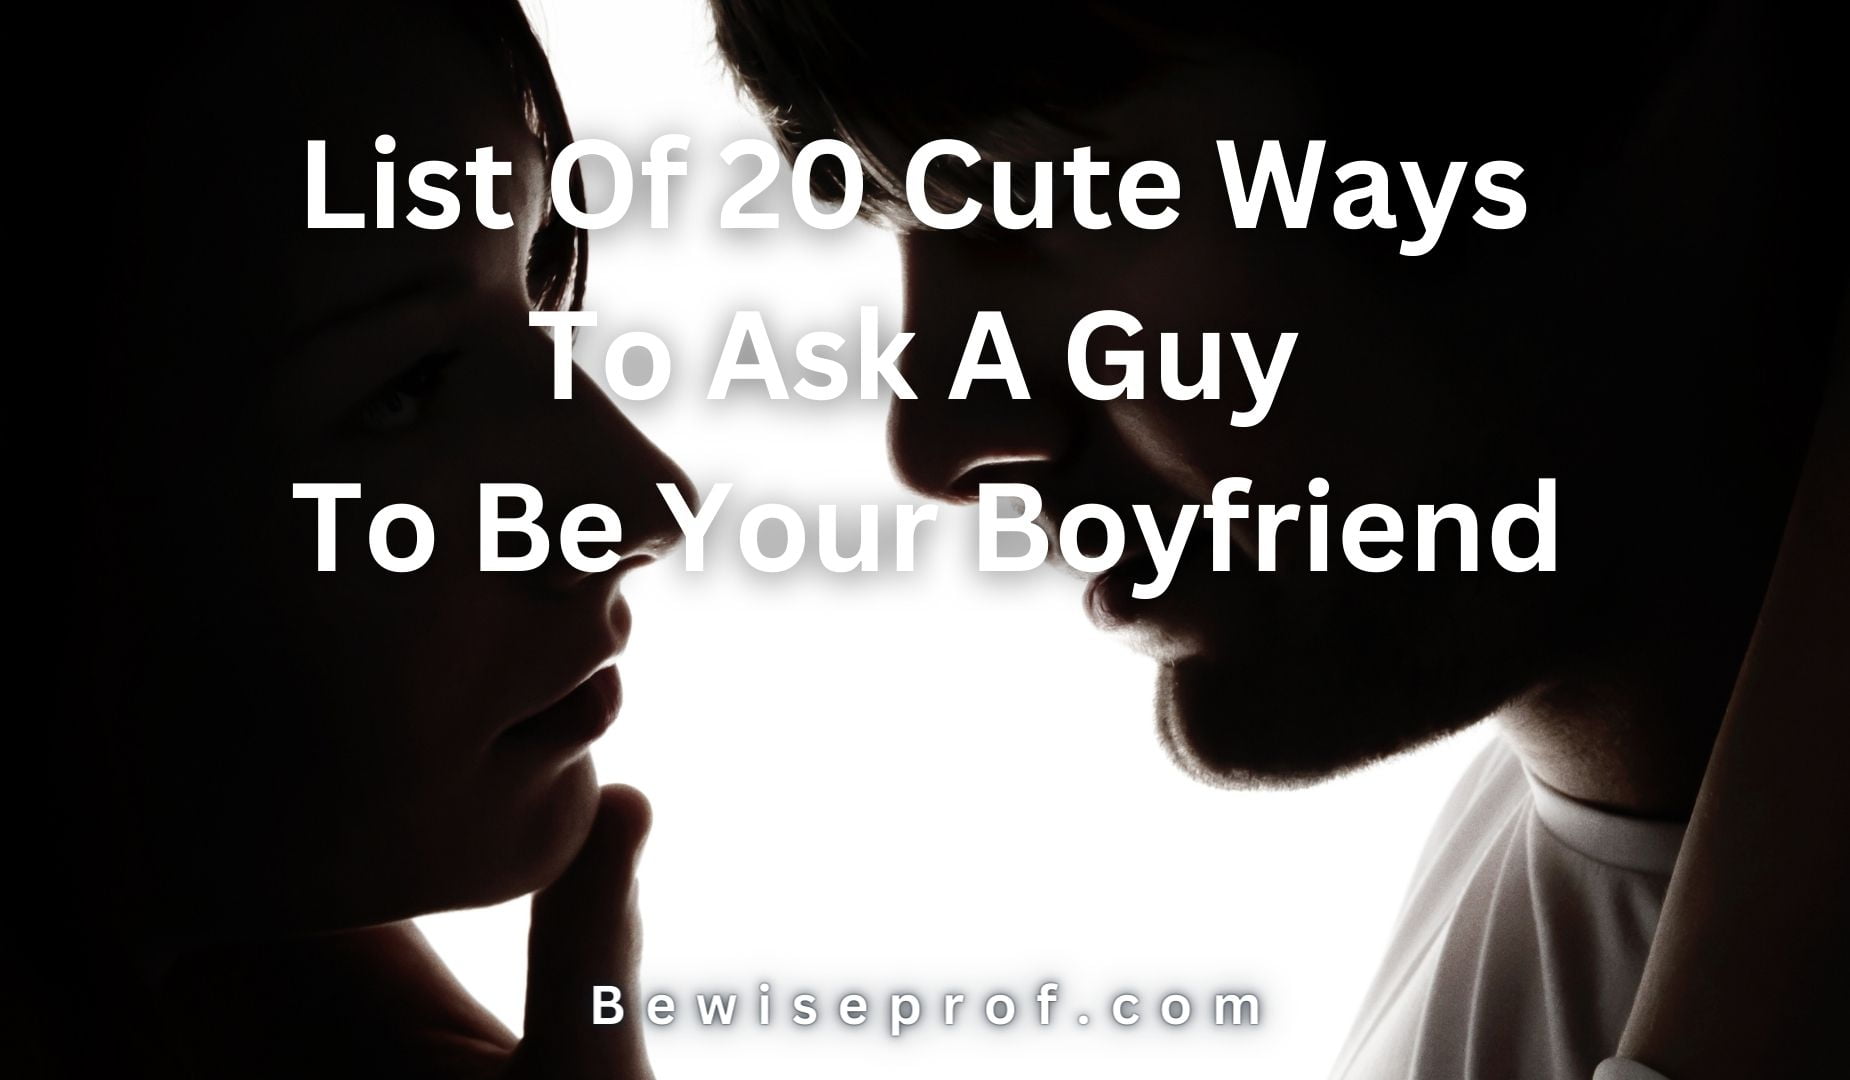 List Of 20 Cute Ways To Ask A Guy To Be Your Boyfriend